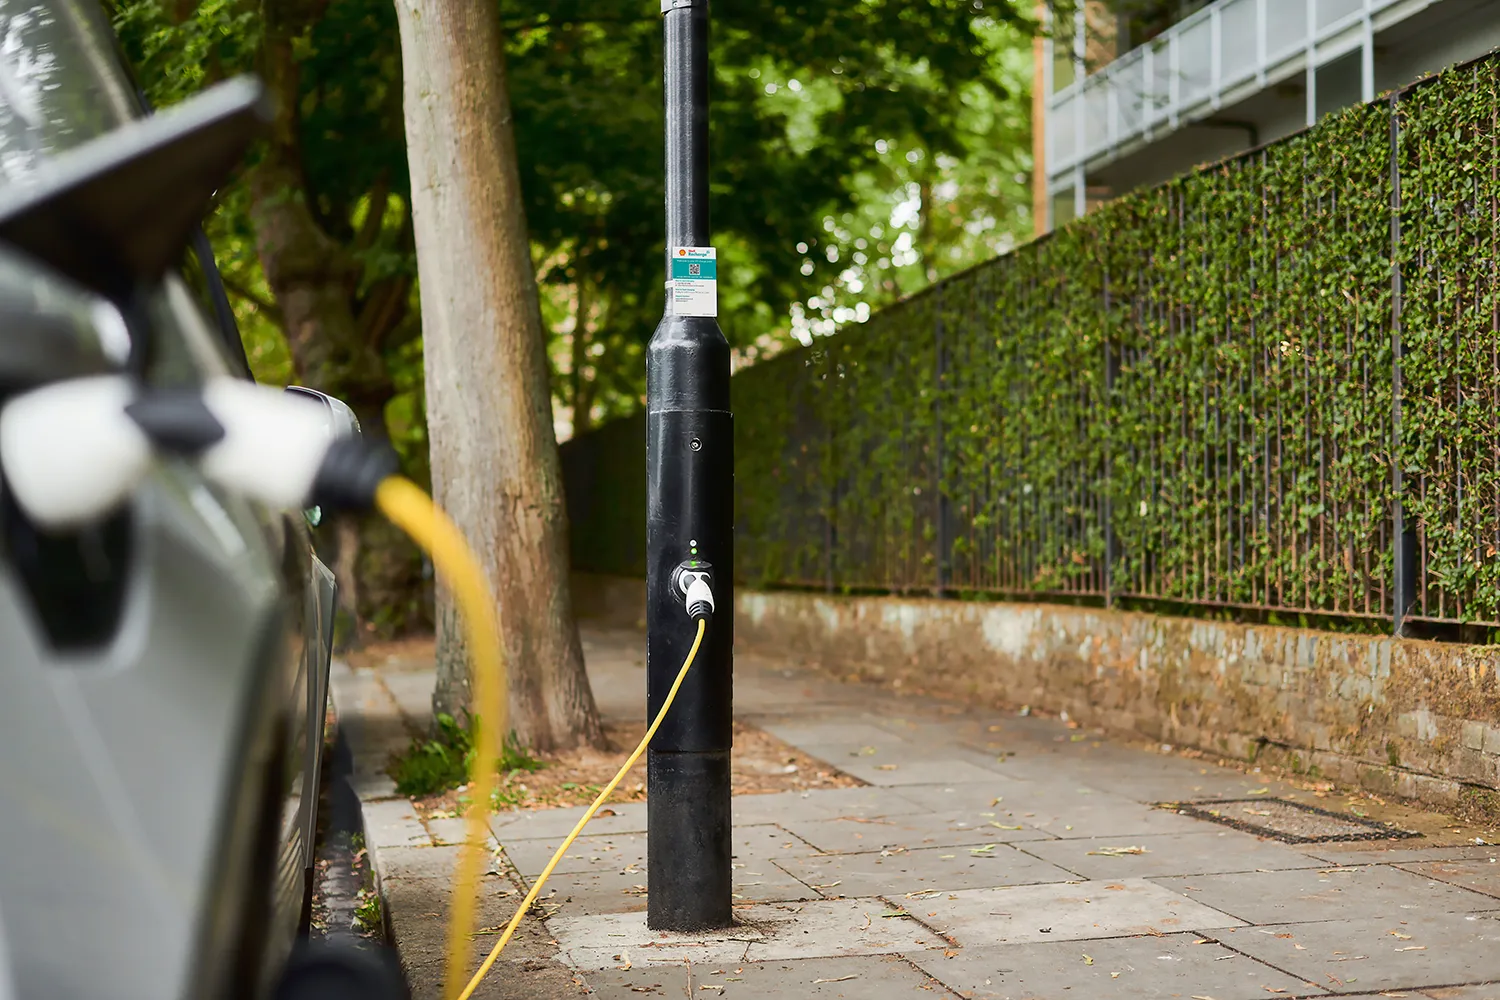 A charging cable of an EV is plugged into a Shell Recharge streetlight charger, a technology in which Shell ubitricity is a market leader in the UK in.